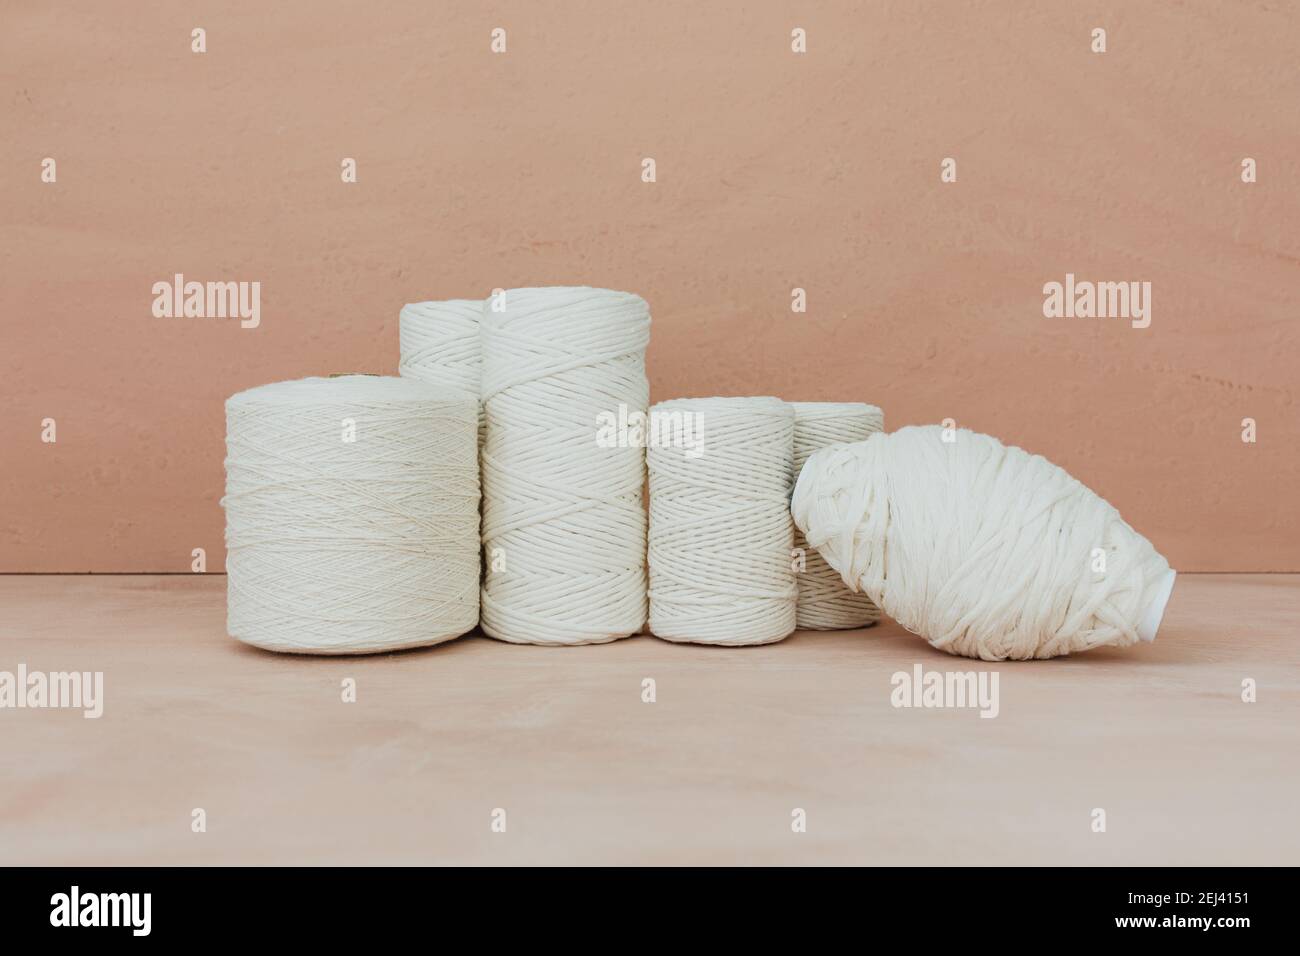 Set of white knitting yarn spool on beige background. Different size cotton threads. Stock Photo